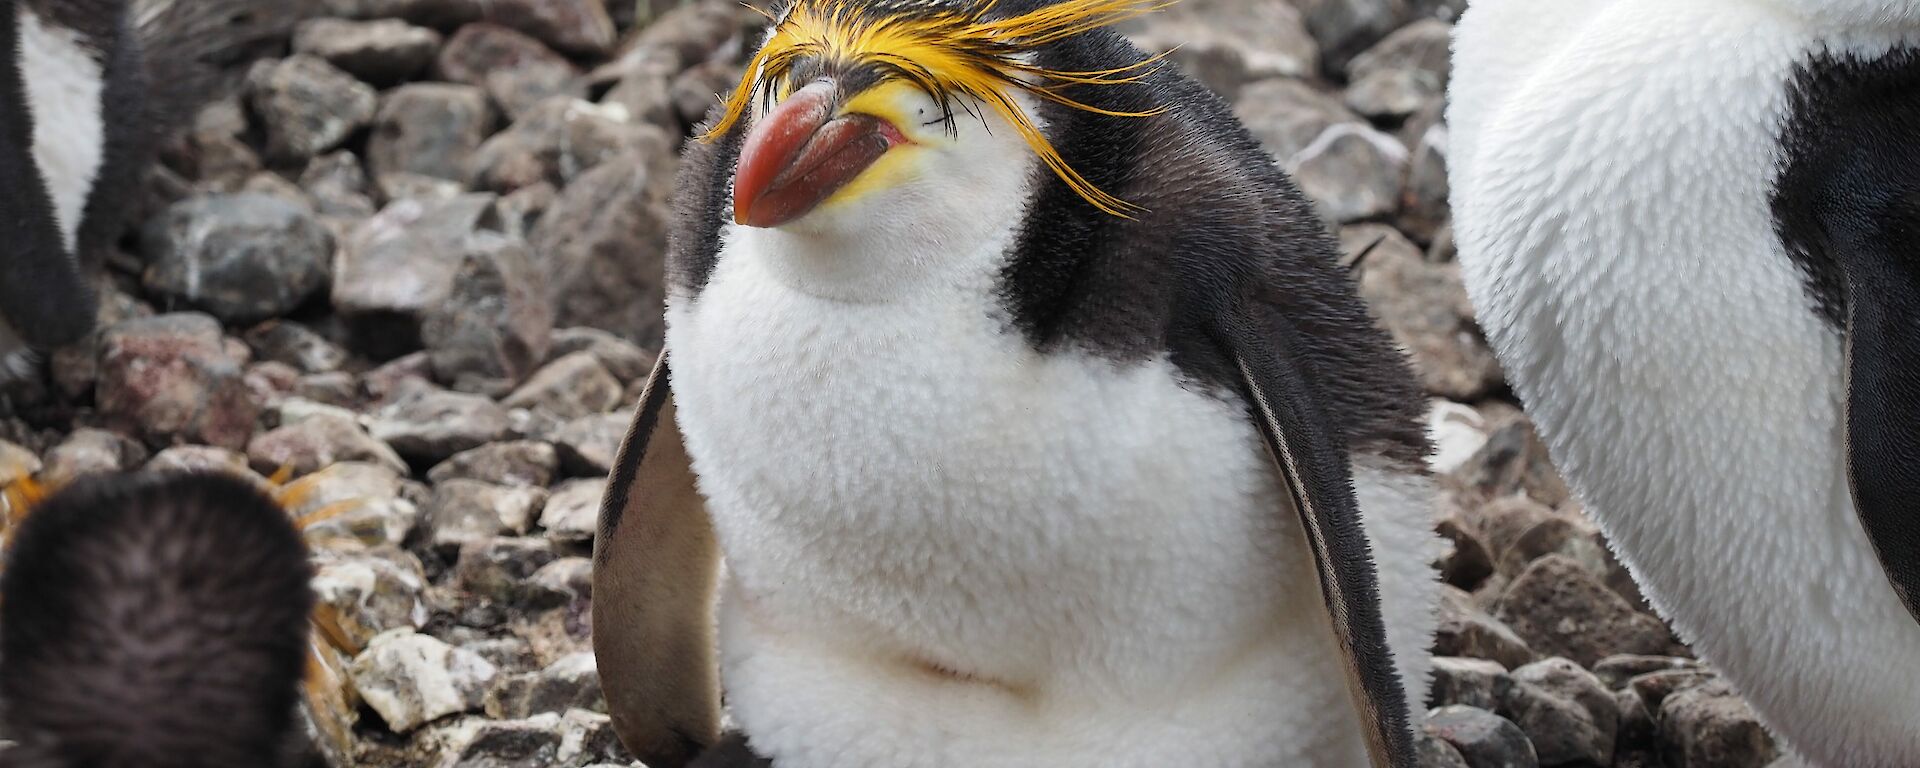 A royal penguin and chick at the Sandy Bay colony.